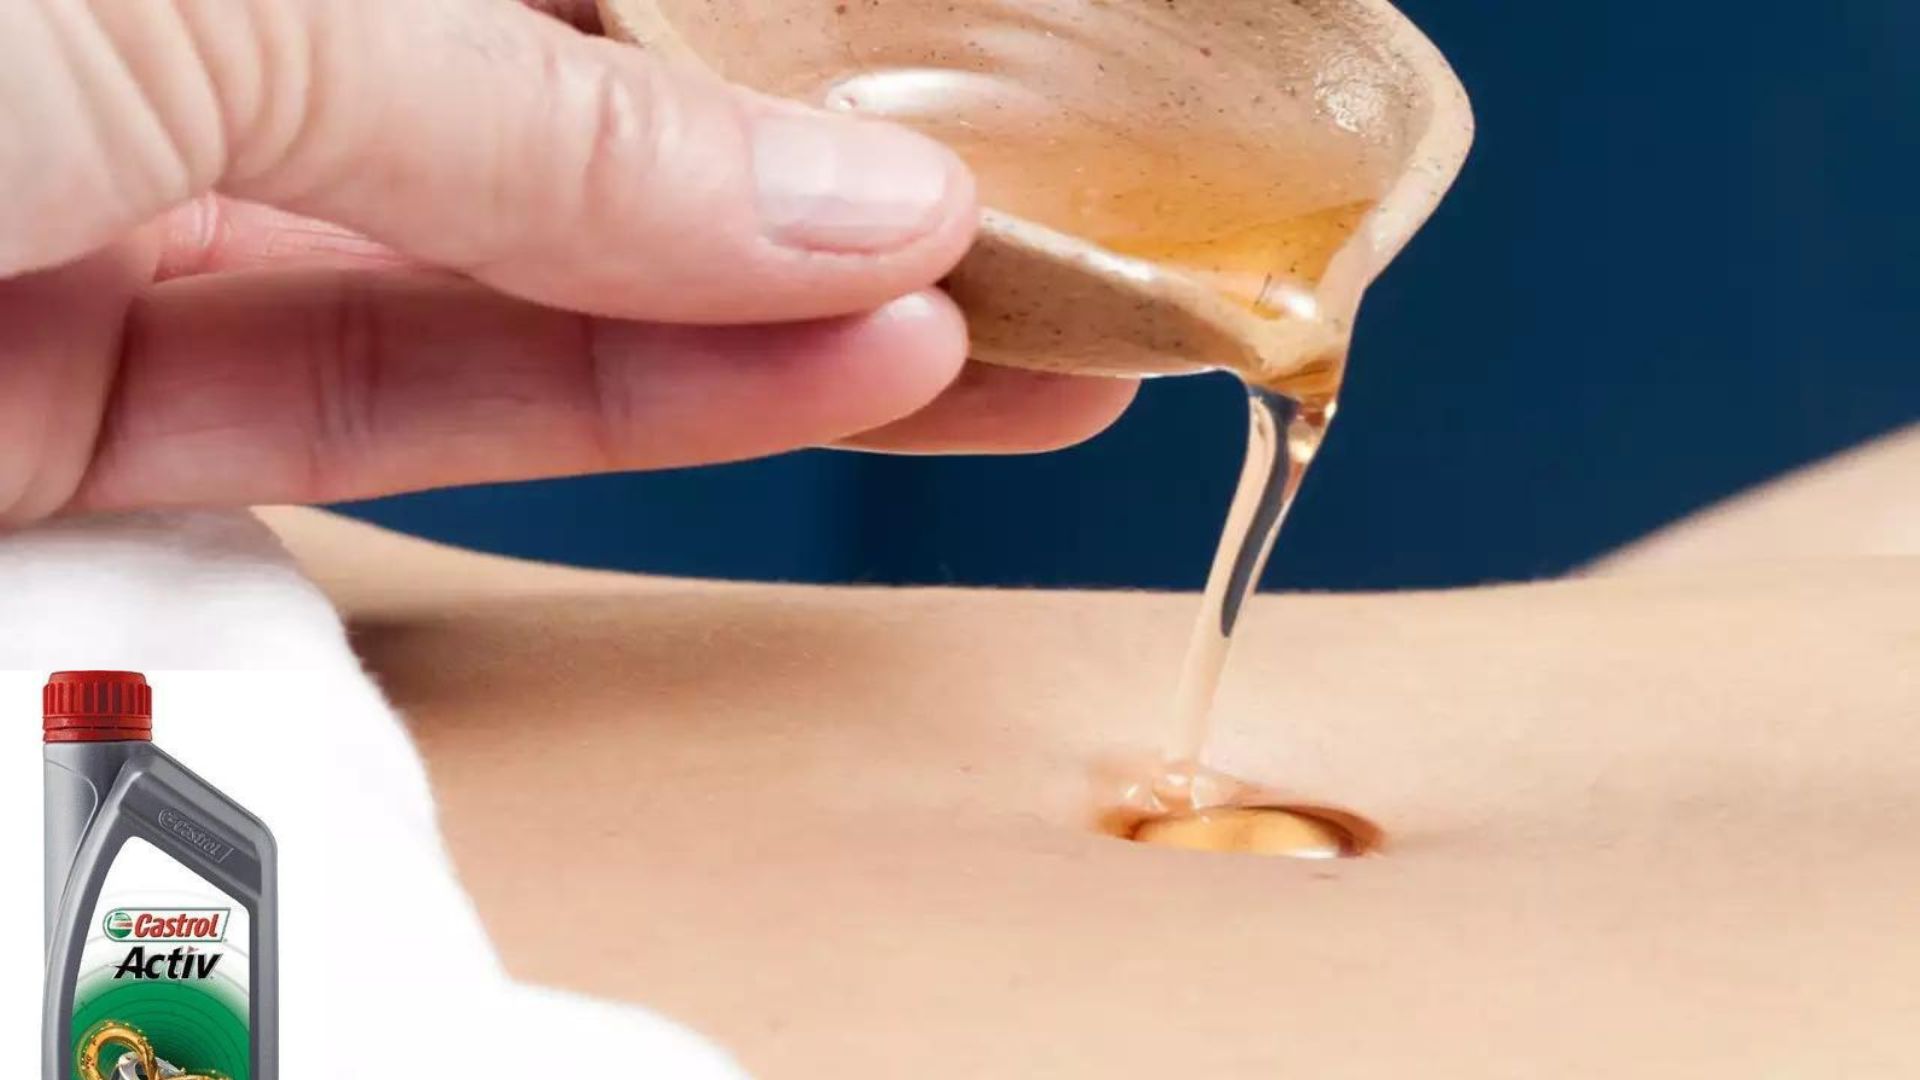 Castrol Oil in Belly Button: A Risky Trend You Need to Avoid